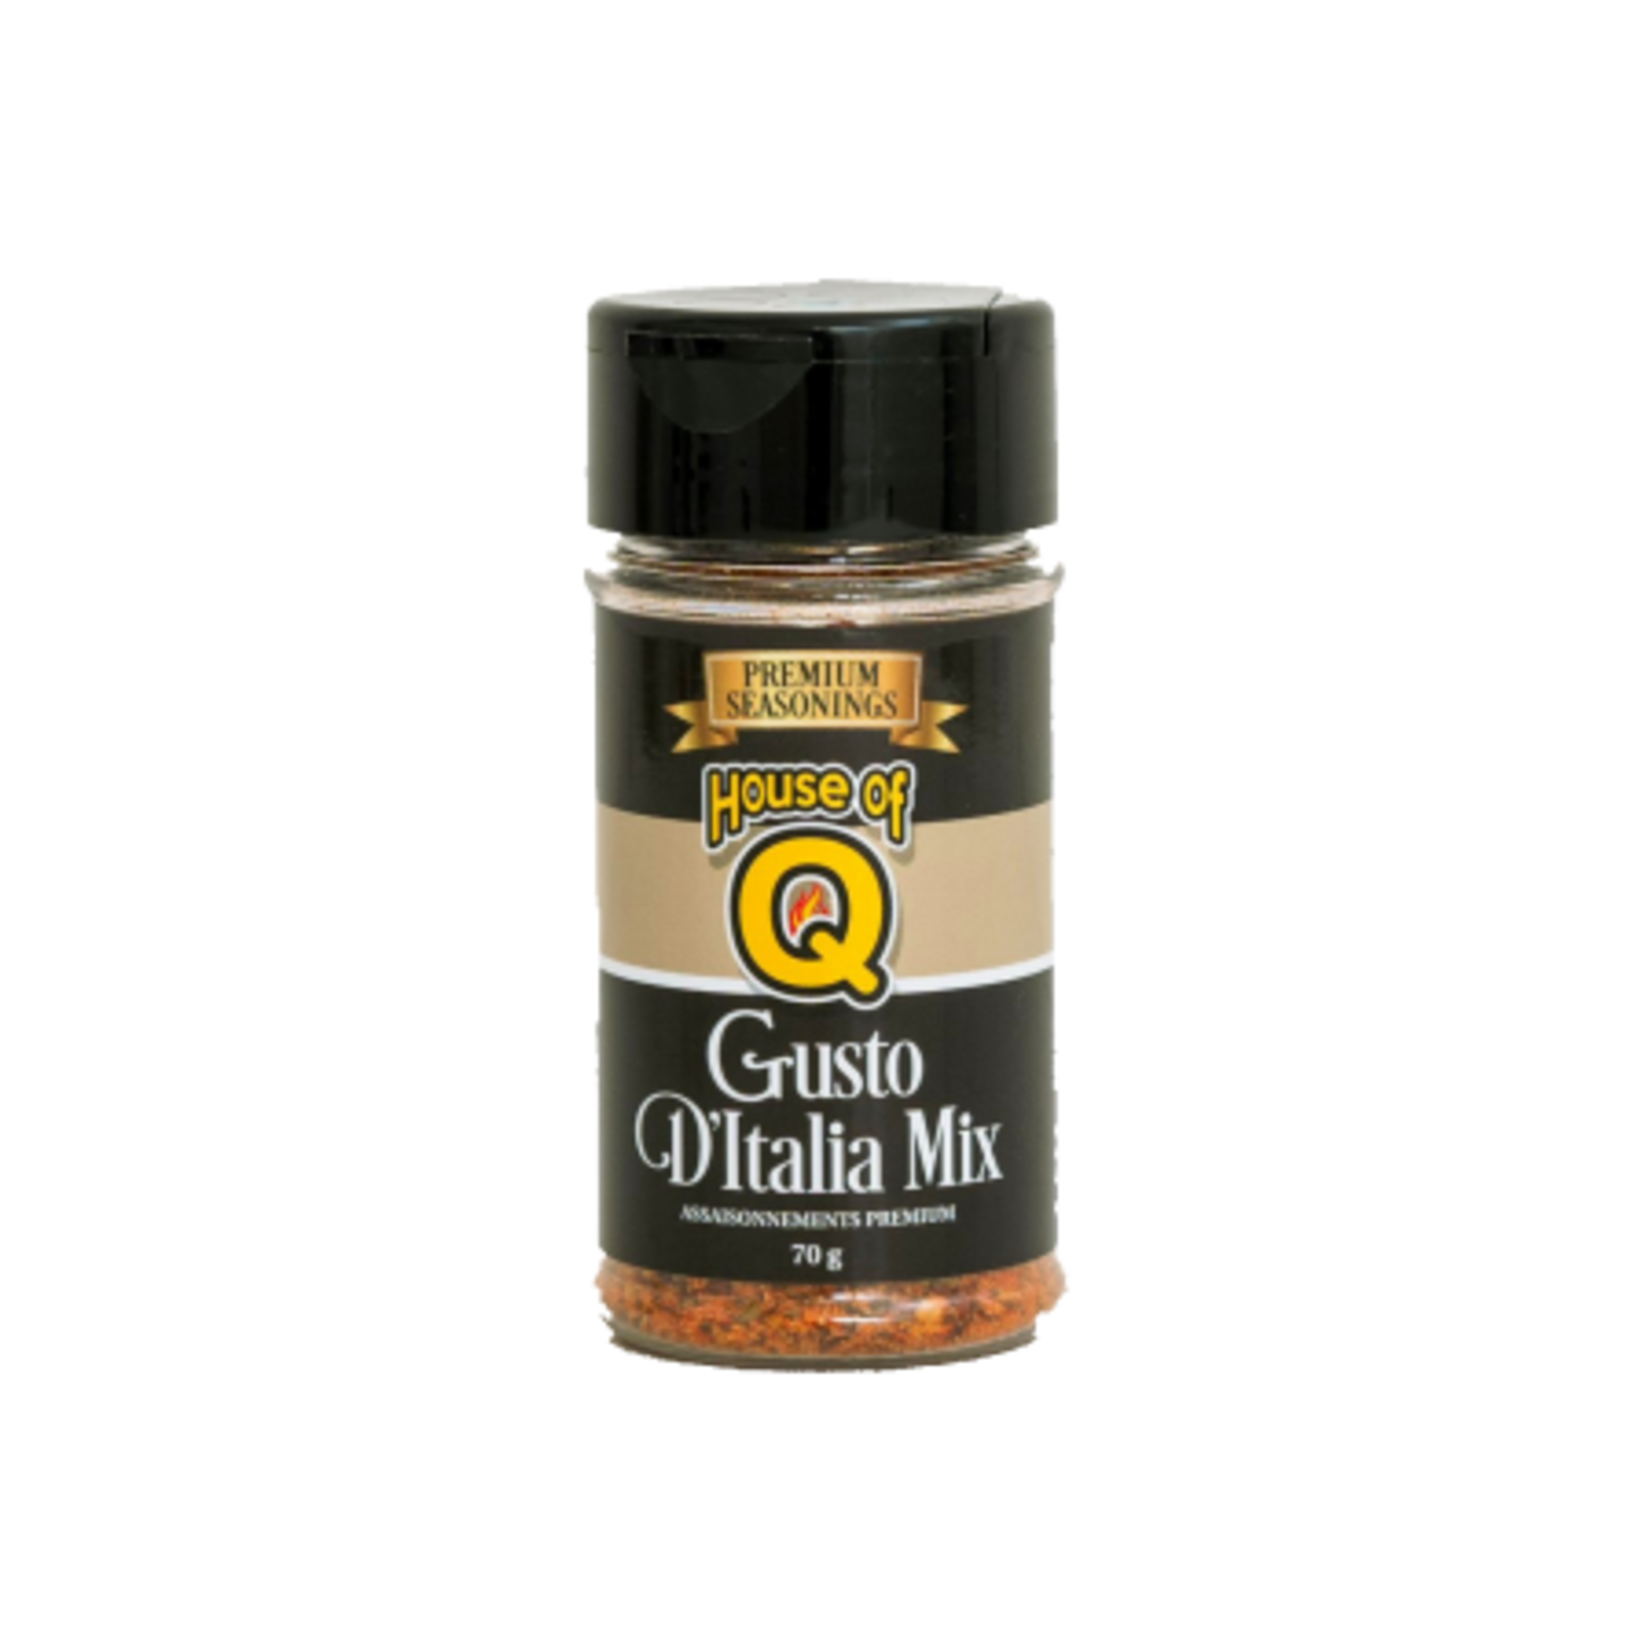 HOUSE OF Q HOUSE OF Q Gusto D'Italia Mix 70g